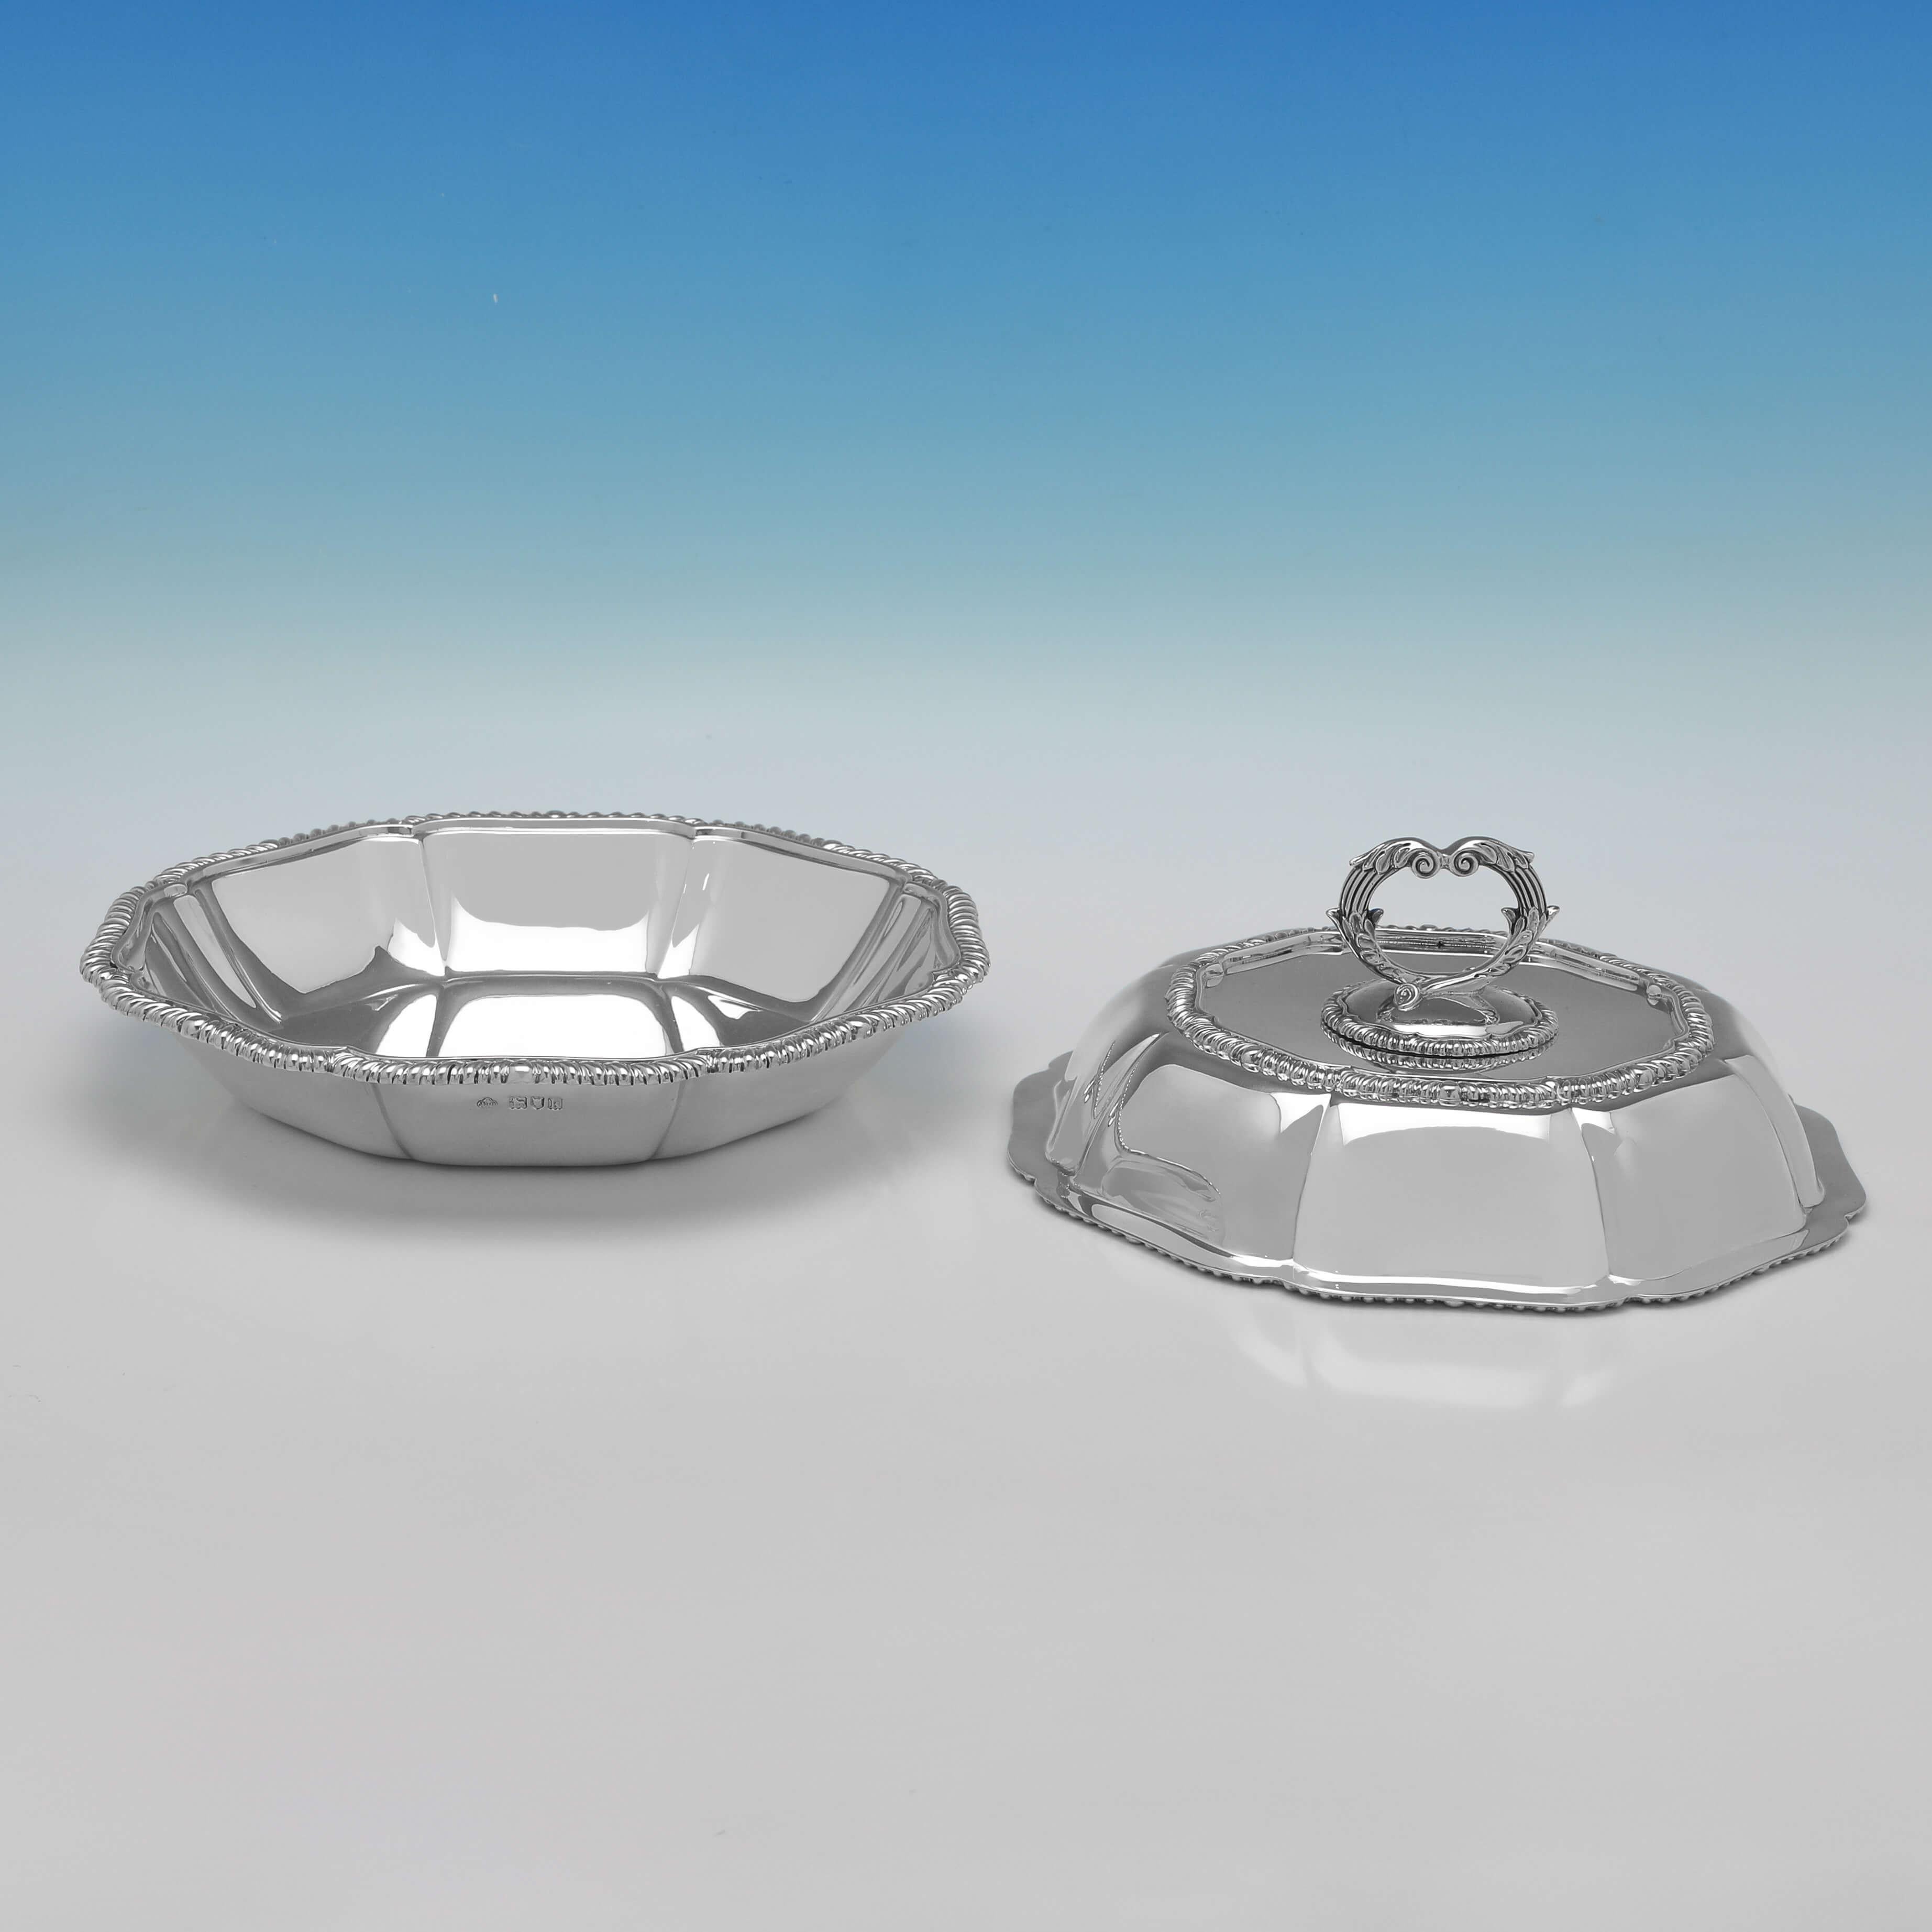 English Edwardian Sterling Silver Pair of Serving Dishes - Entree Dishes - London 1905 For Sale